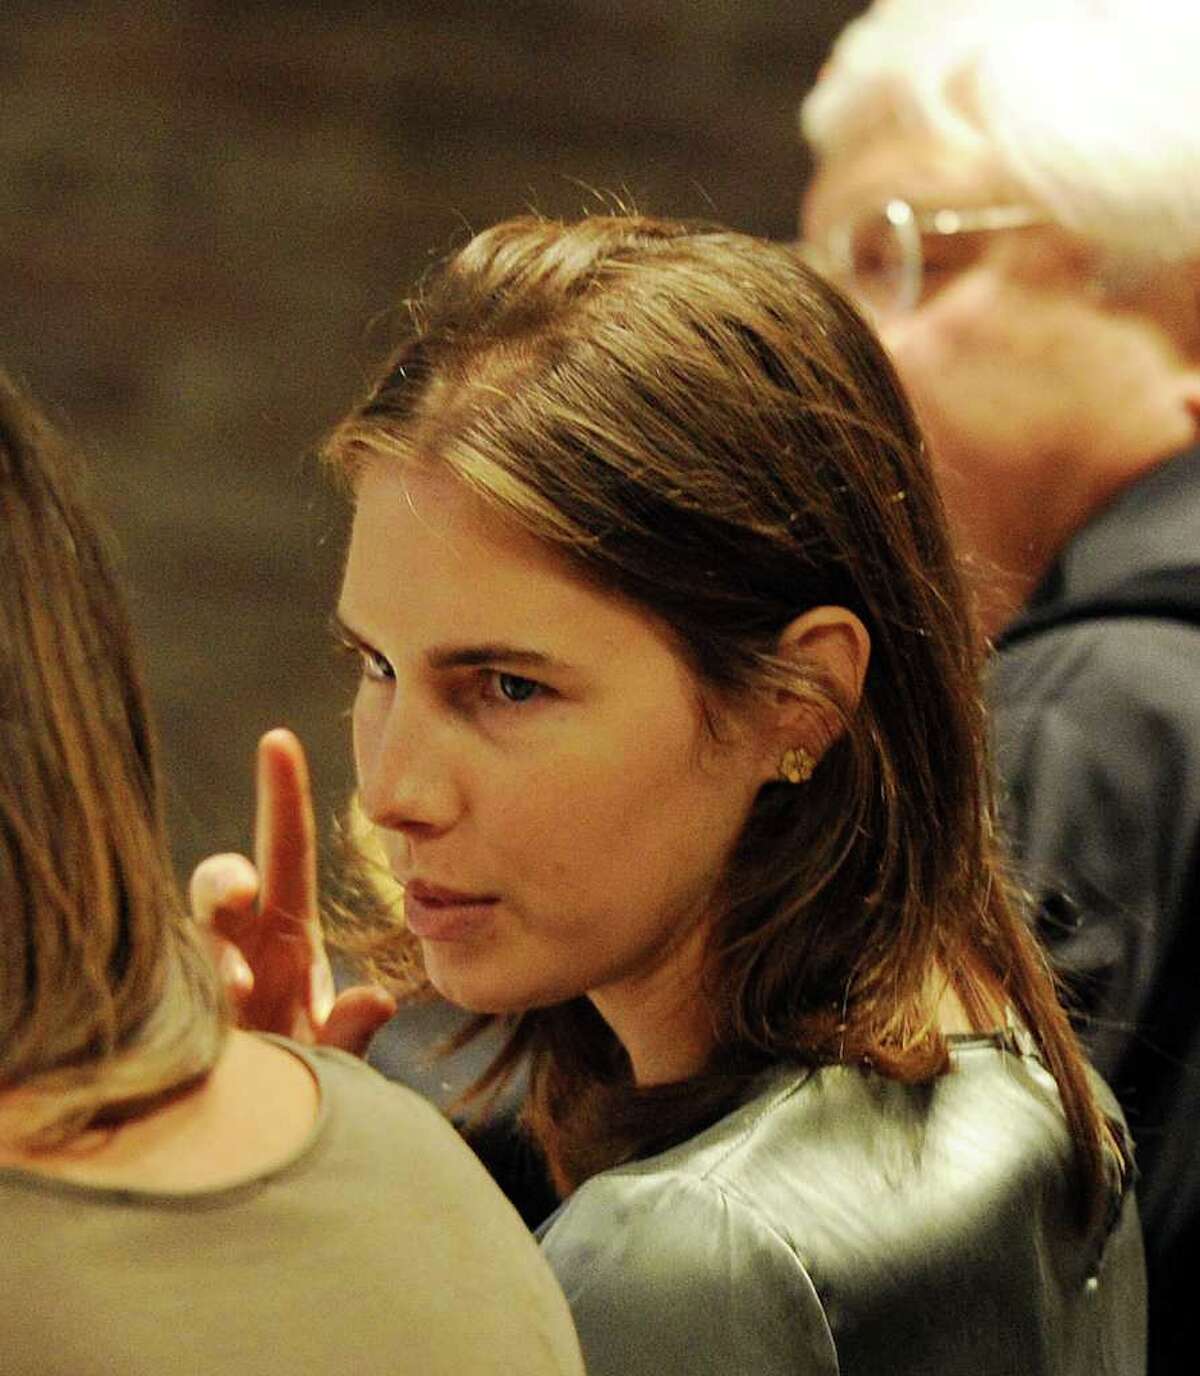 Amanda Knox attends appeal hearing at Perugia's Court of Appeal on Thursday.